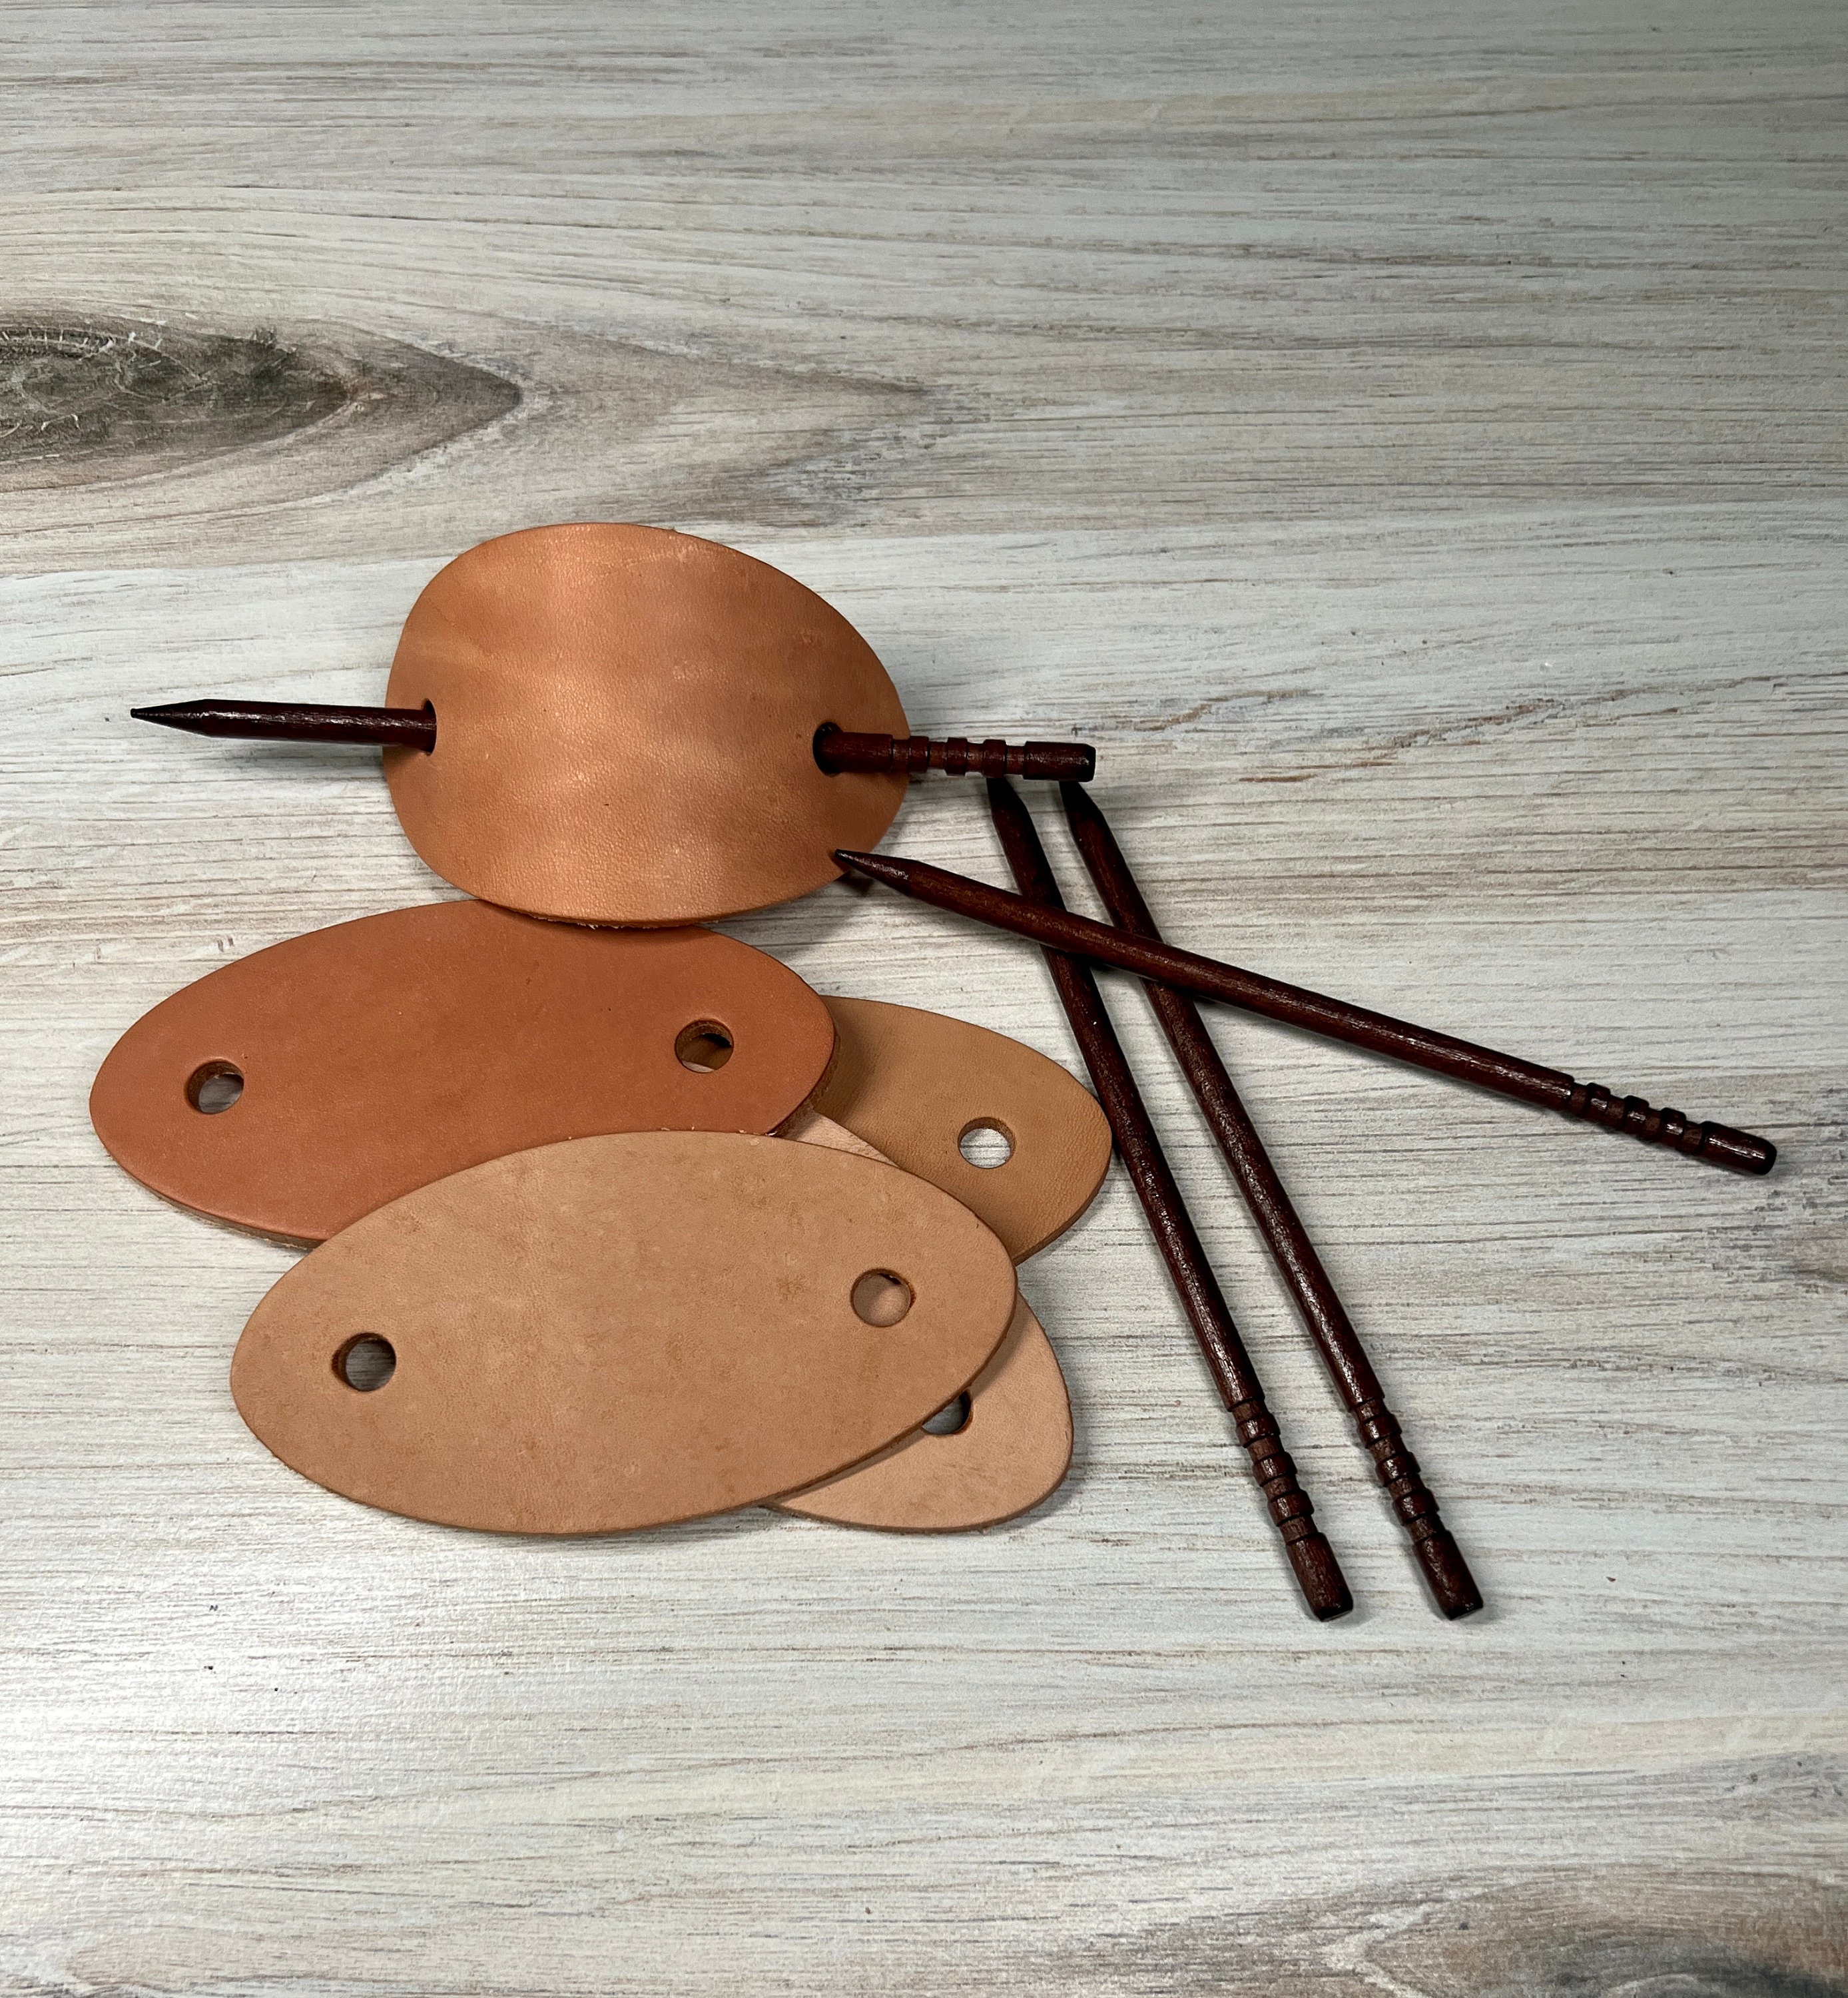 Oval Leather Barrette Cut Out Blanks With Wood Stick, Leather